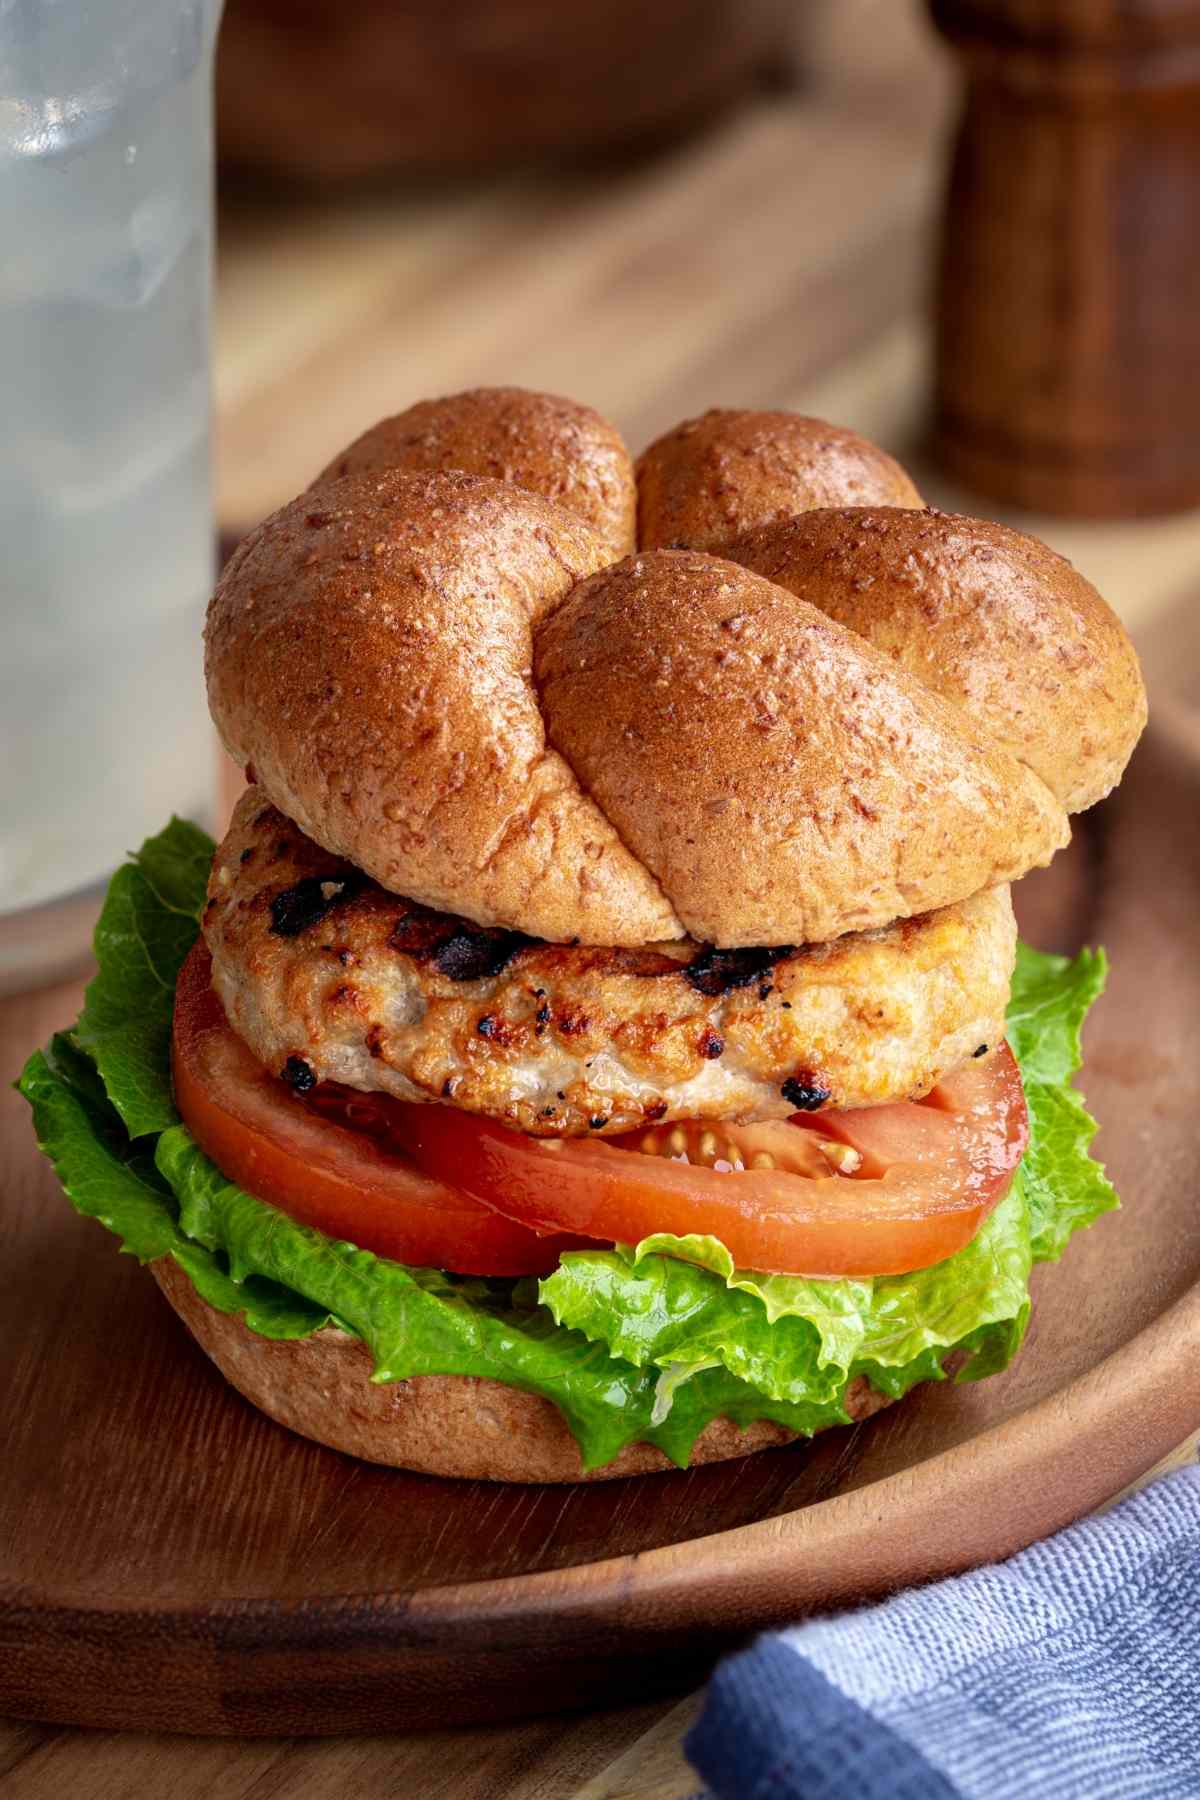 When perfectly cooked, they’re tender, juicy, and delicious. In this post, we’re sharing some tips and guidelines on the proper turkey burger temperature and how to cook them so that they are juicy and delicious every time.